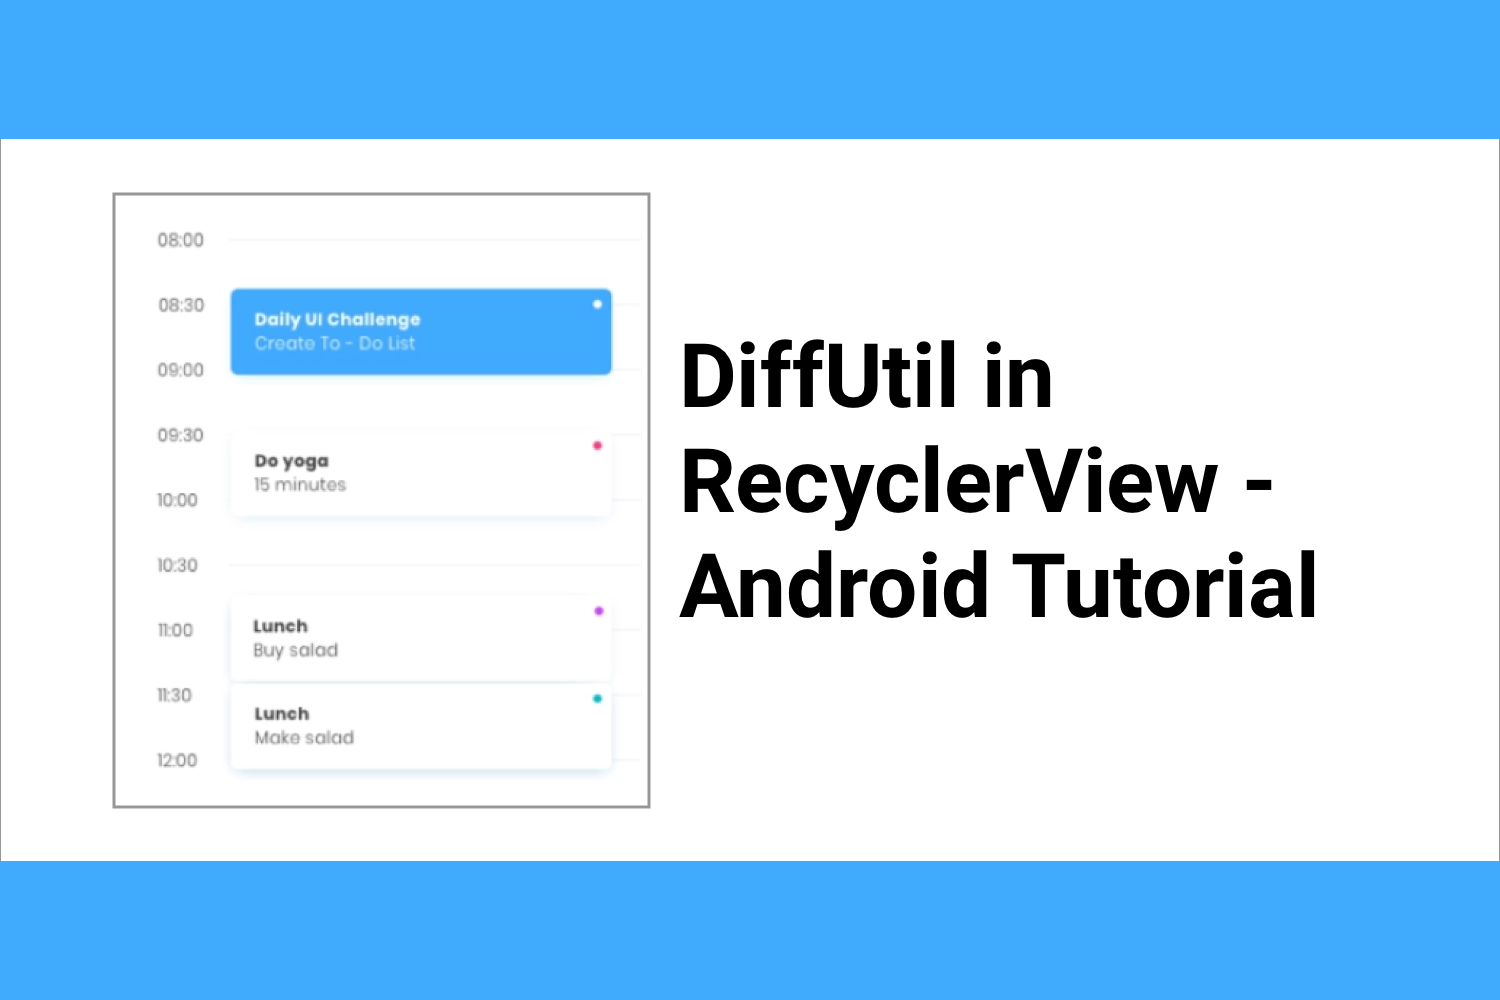 The powerful tool DiffUtil in RecyclerView - Android Tutorial